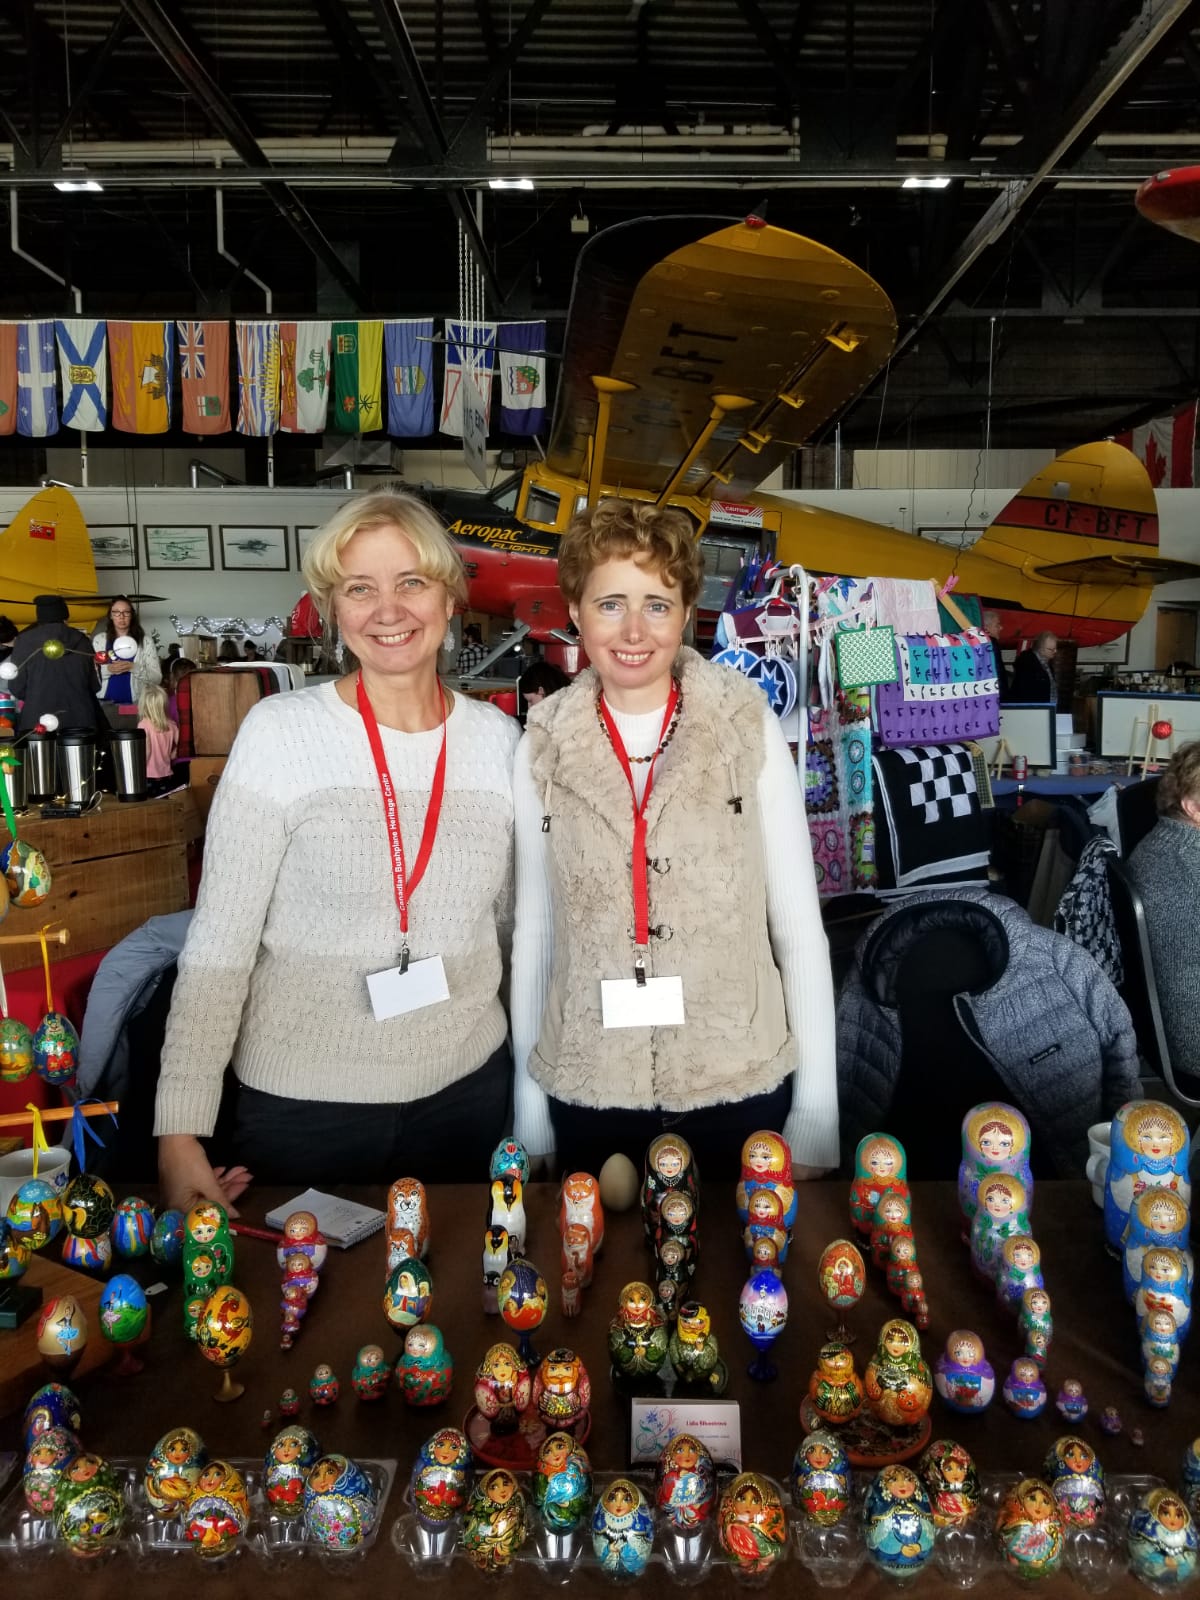  Elena and Lidia at a trade show displaying painted eggs and russian dolls. 